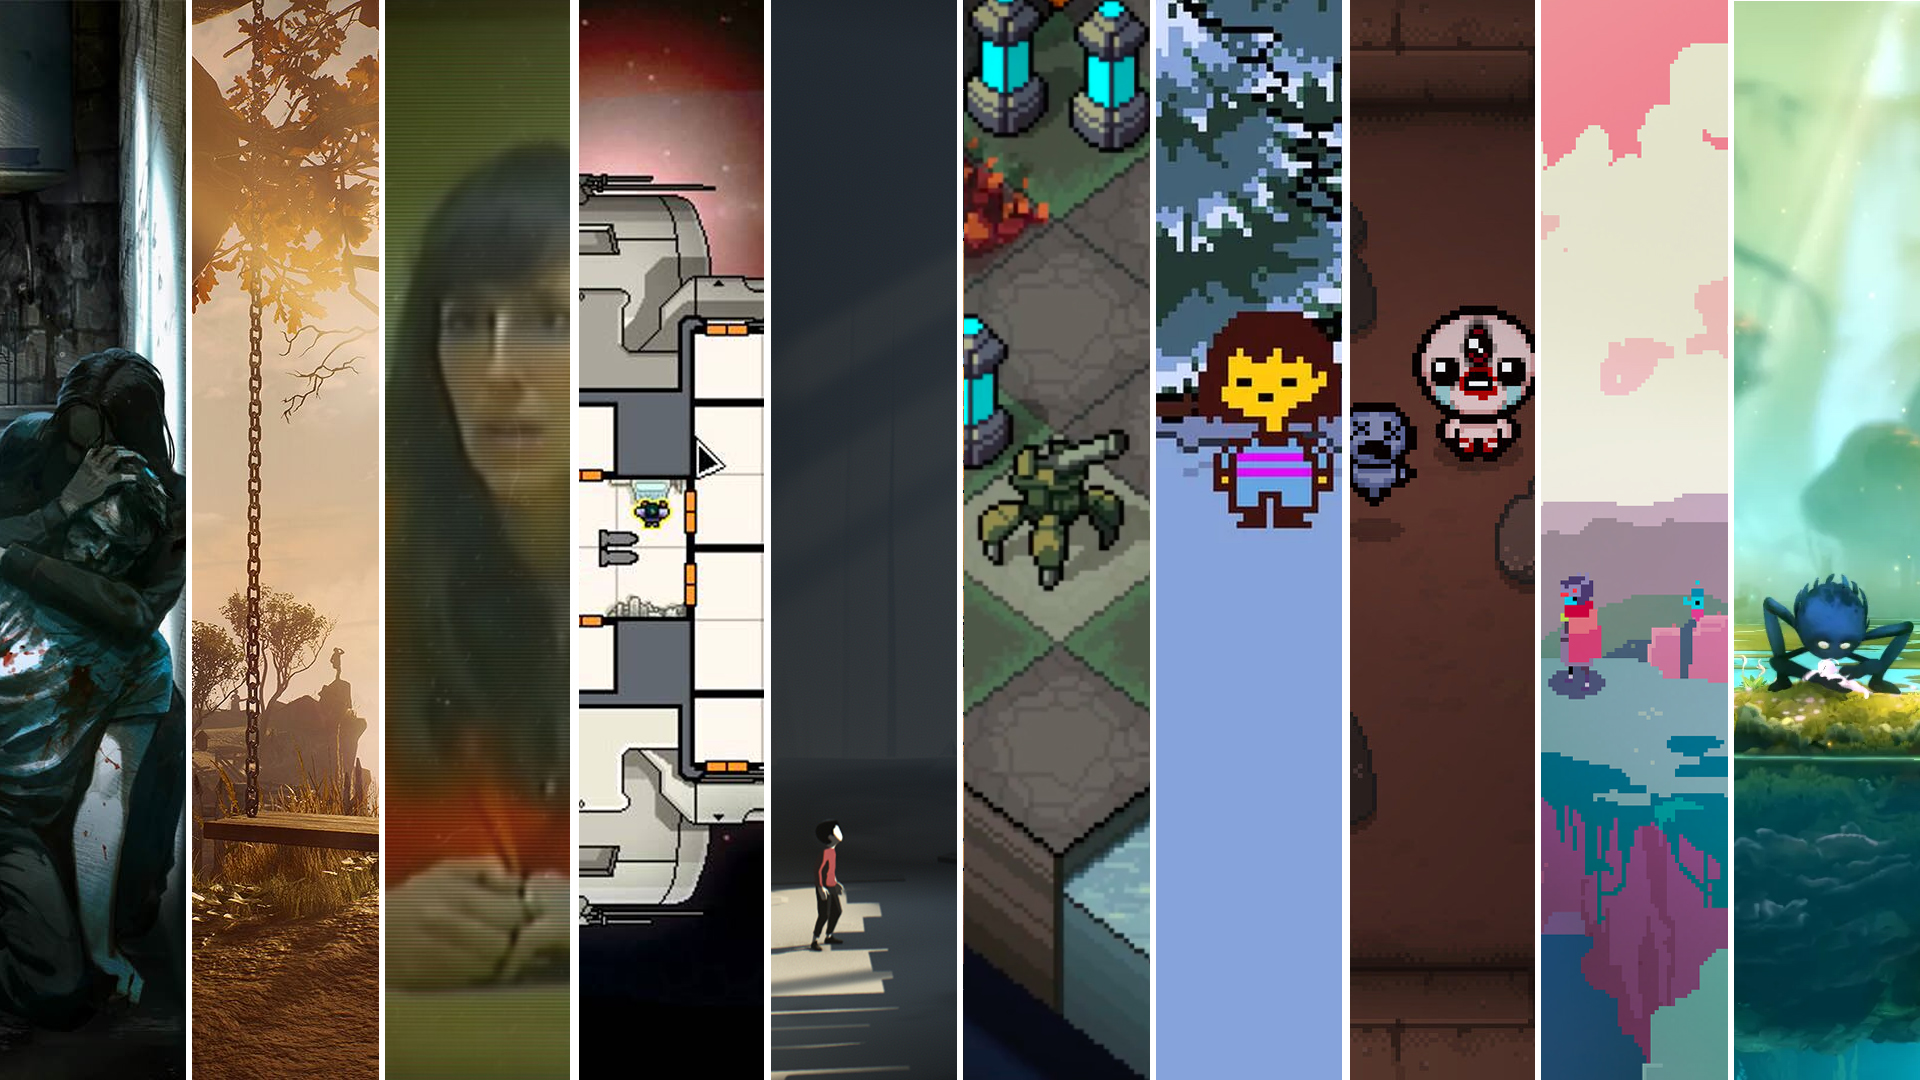 The 100 Best Indie Games of All Time - Page 7 of 10 - The Indie